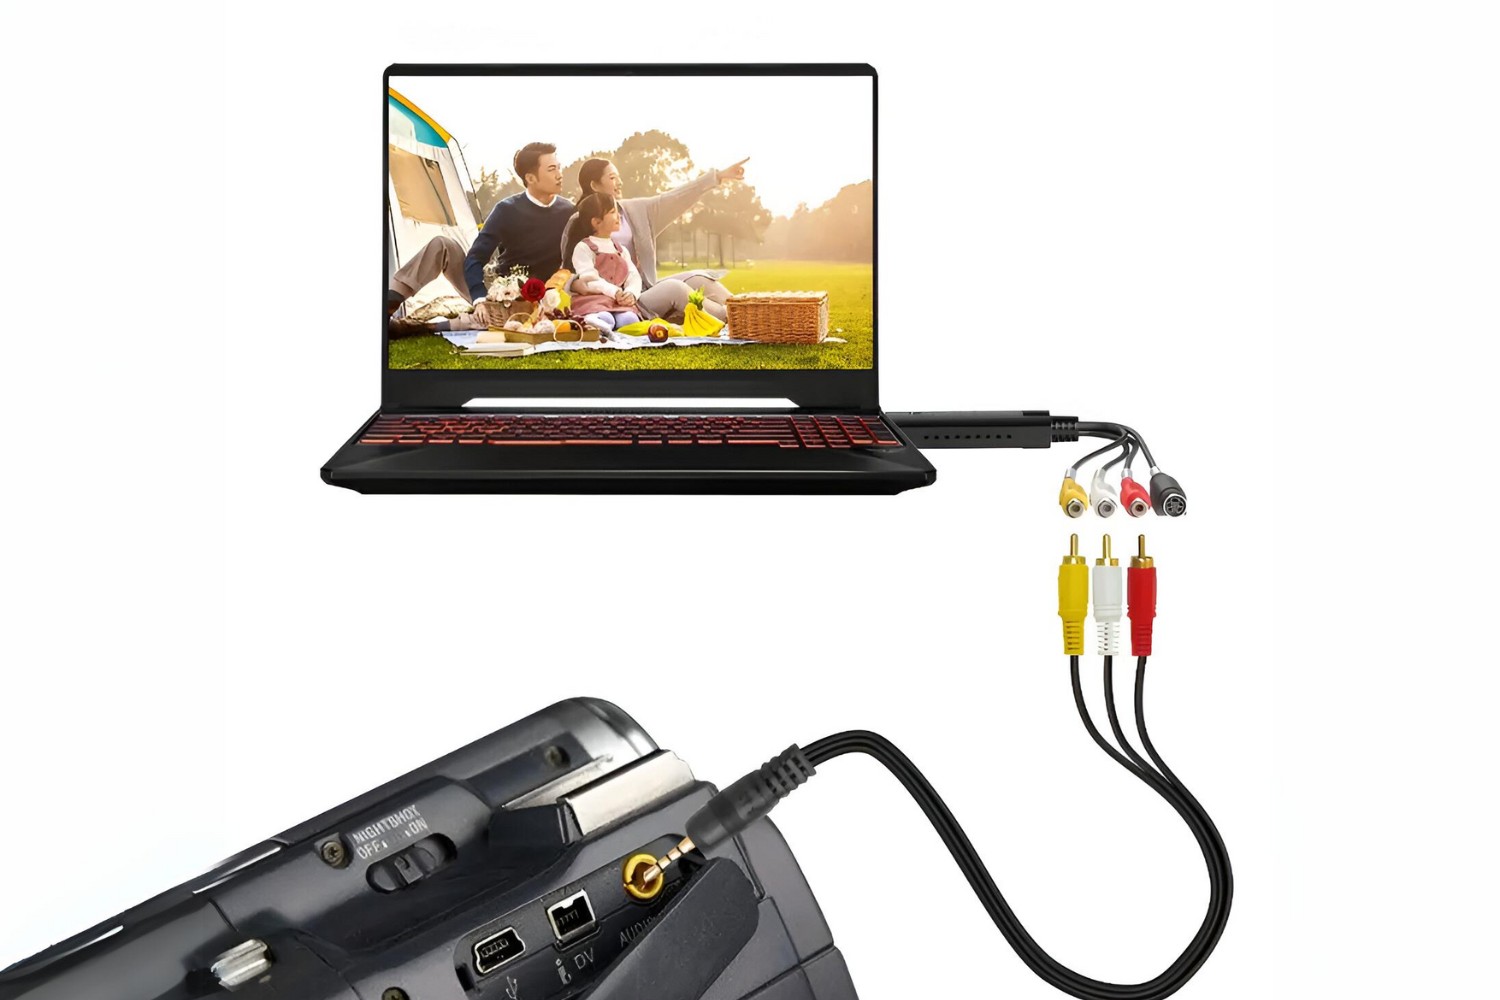 How To Display RCA Camcorder Video On PC